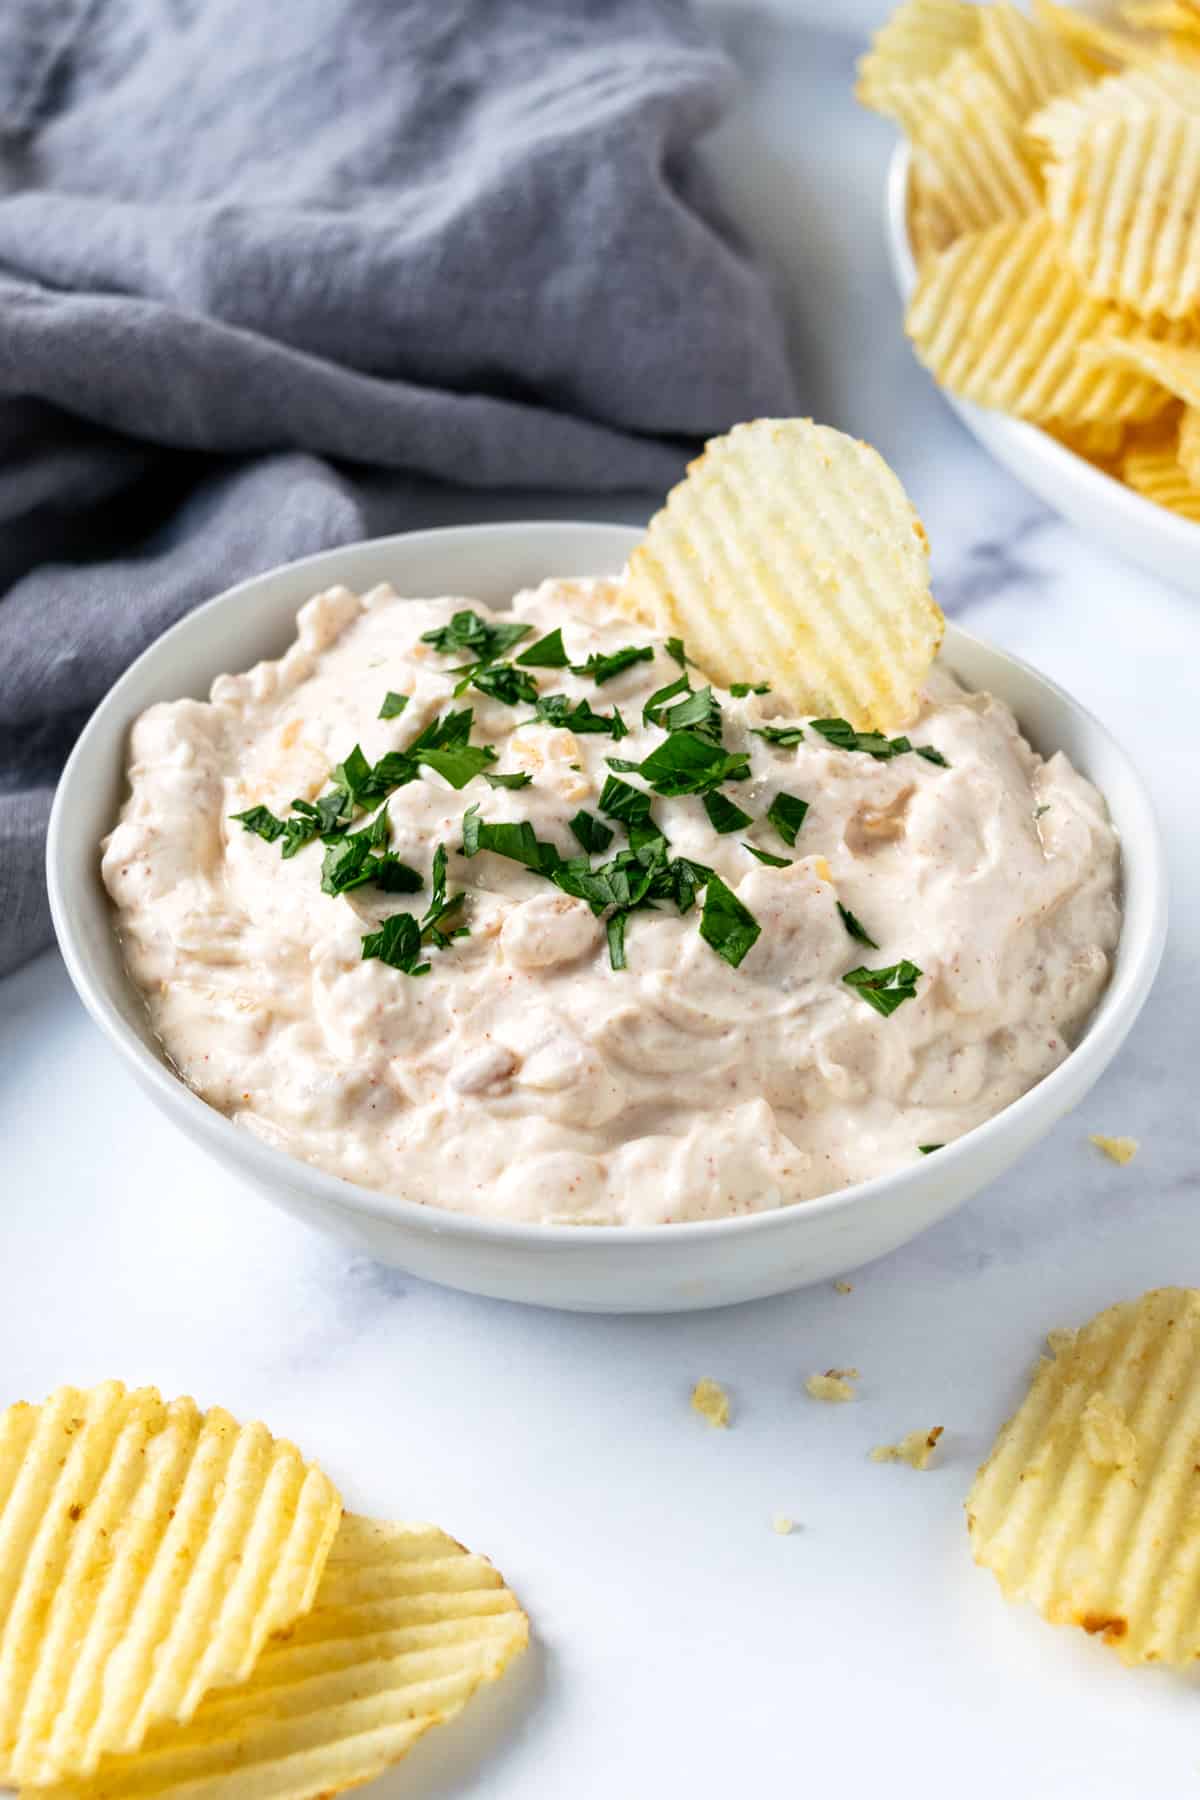 Greek Yogurt French Onion Dip in White Bowl with Chip in it.